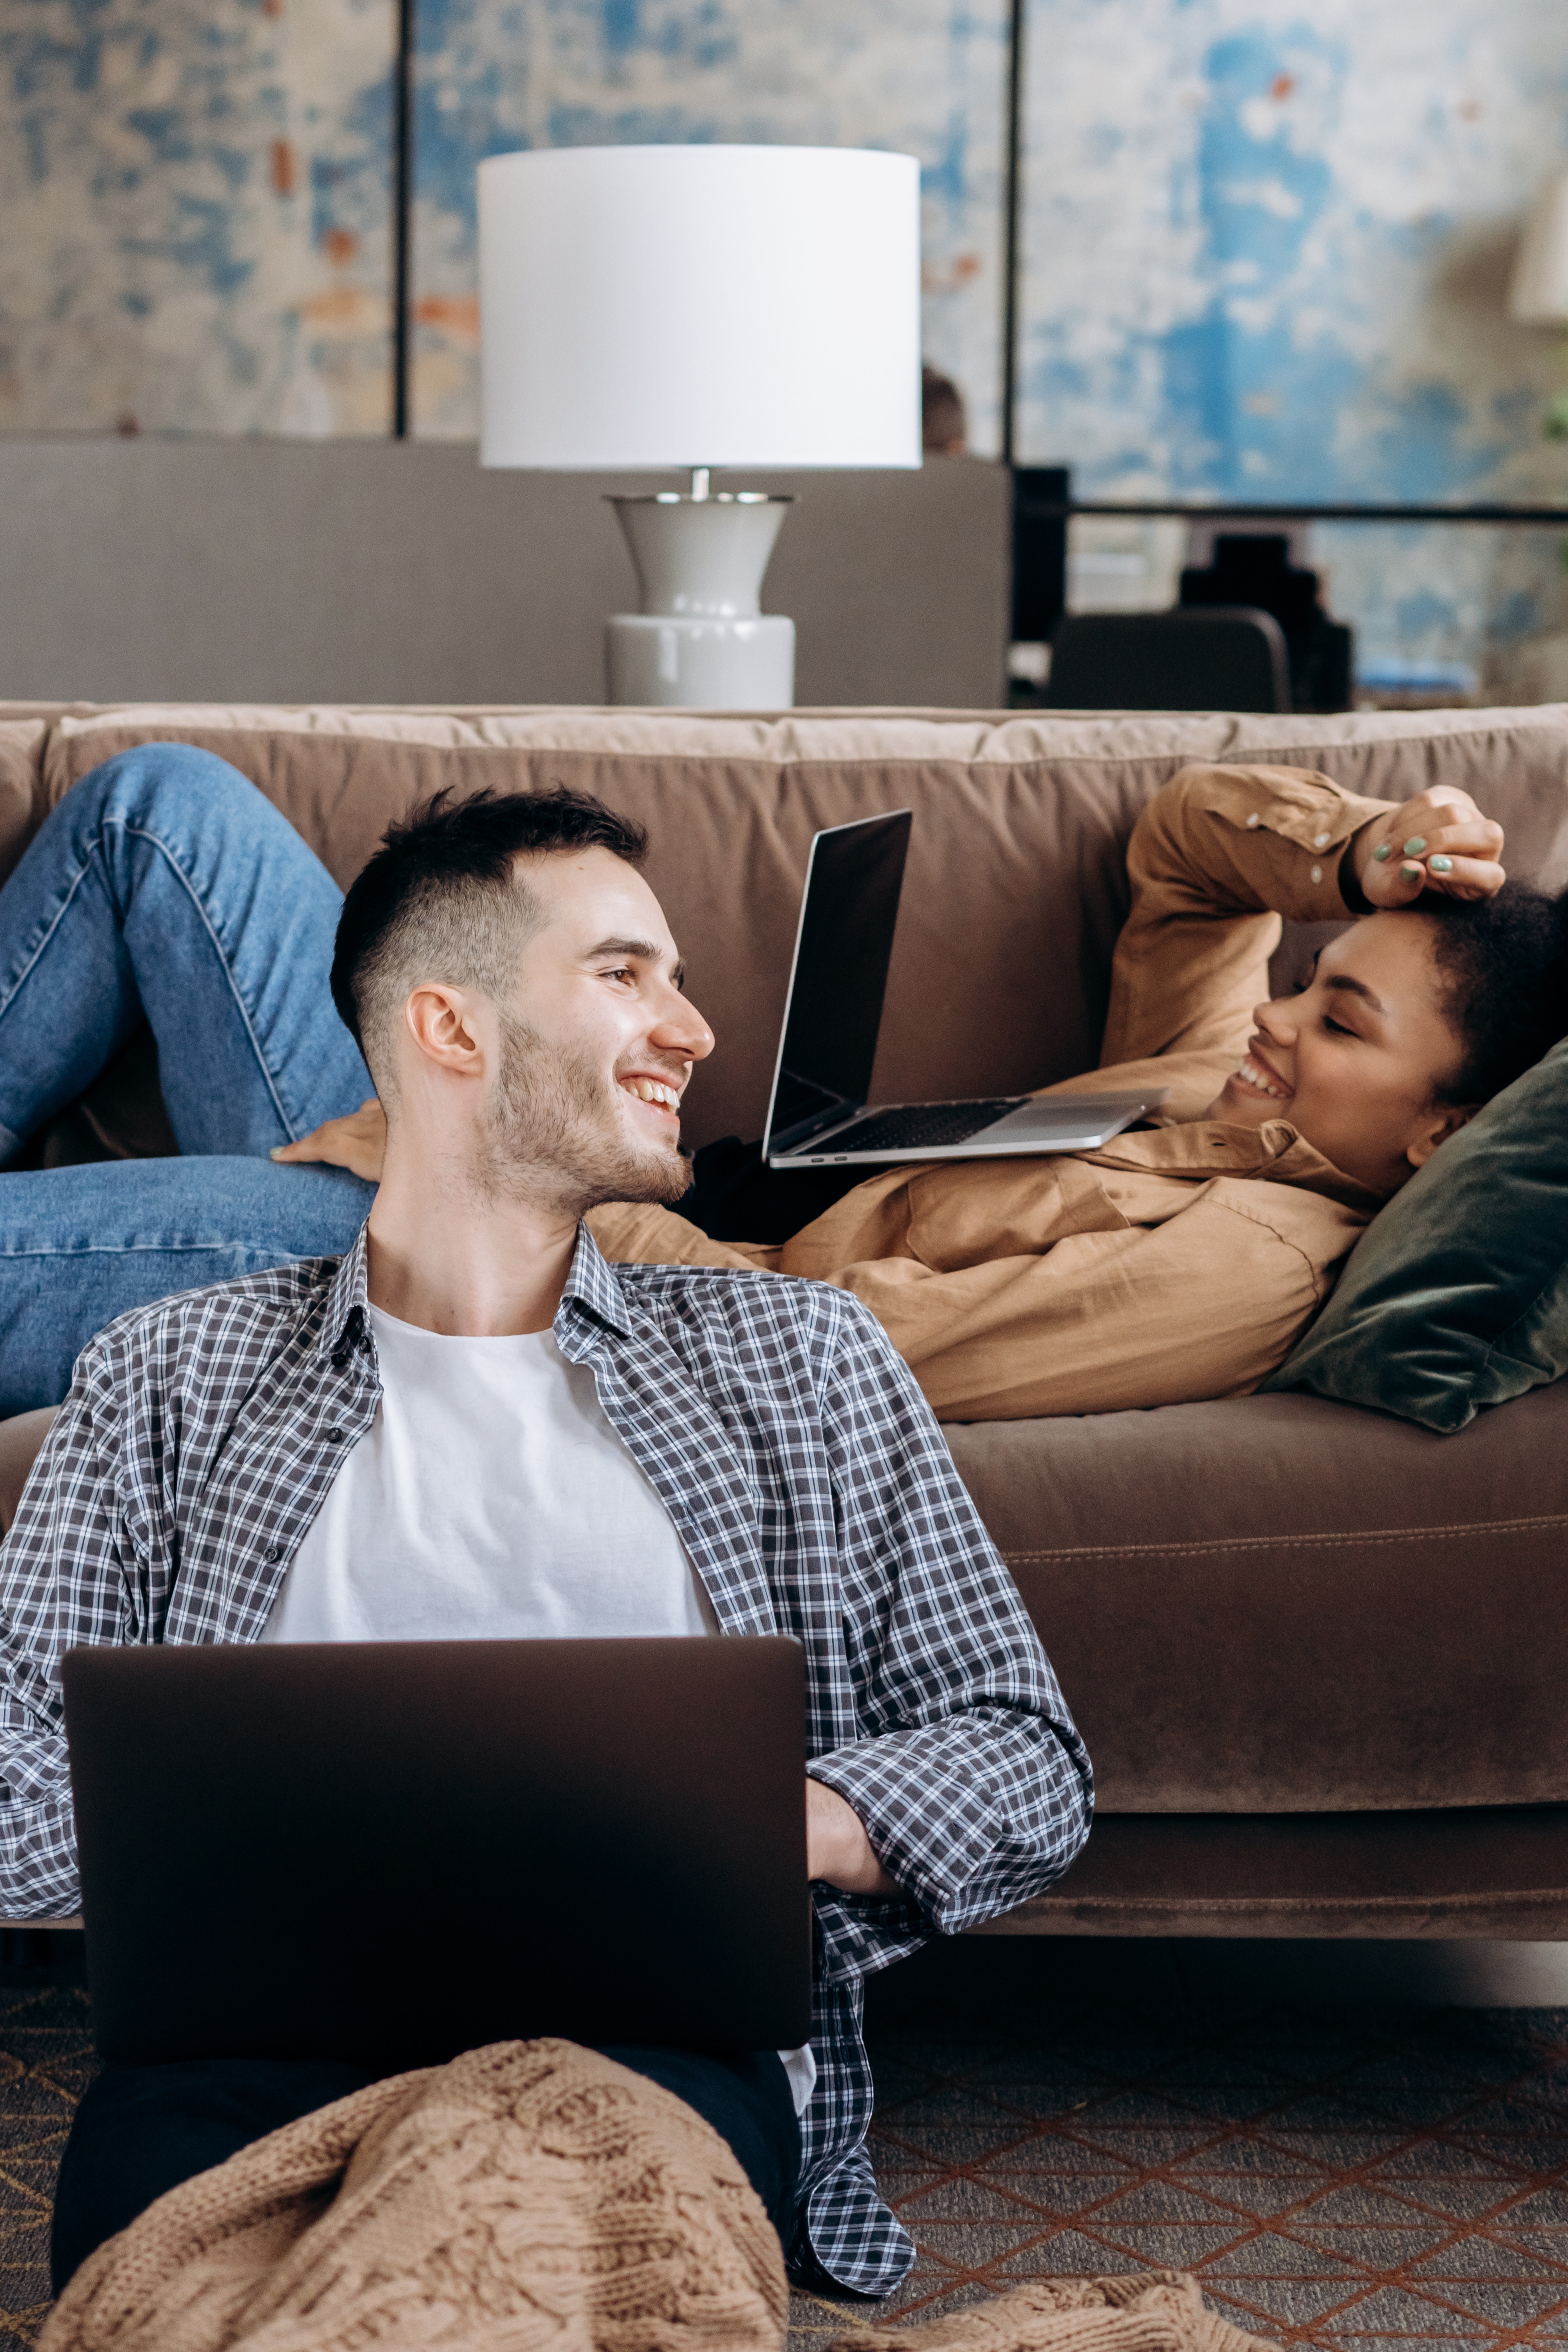 Man In Black And White Checkered Dress Shirt Sitting on Floor With A Woman Lying On A Couch Both Using Laptops. | Source: Pexels